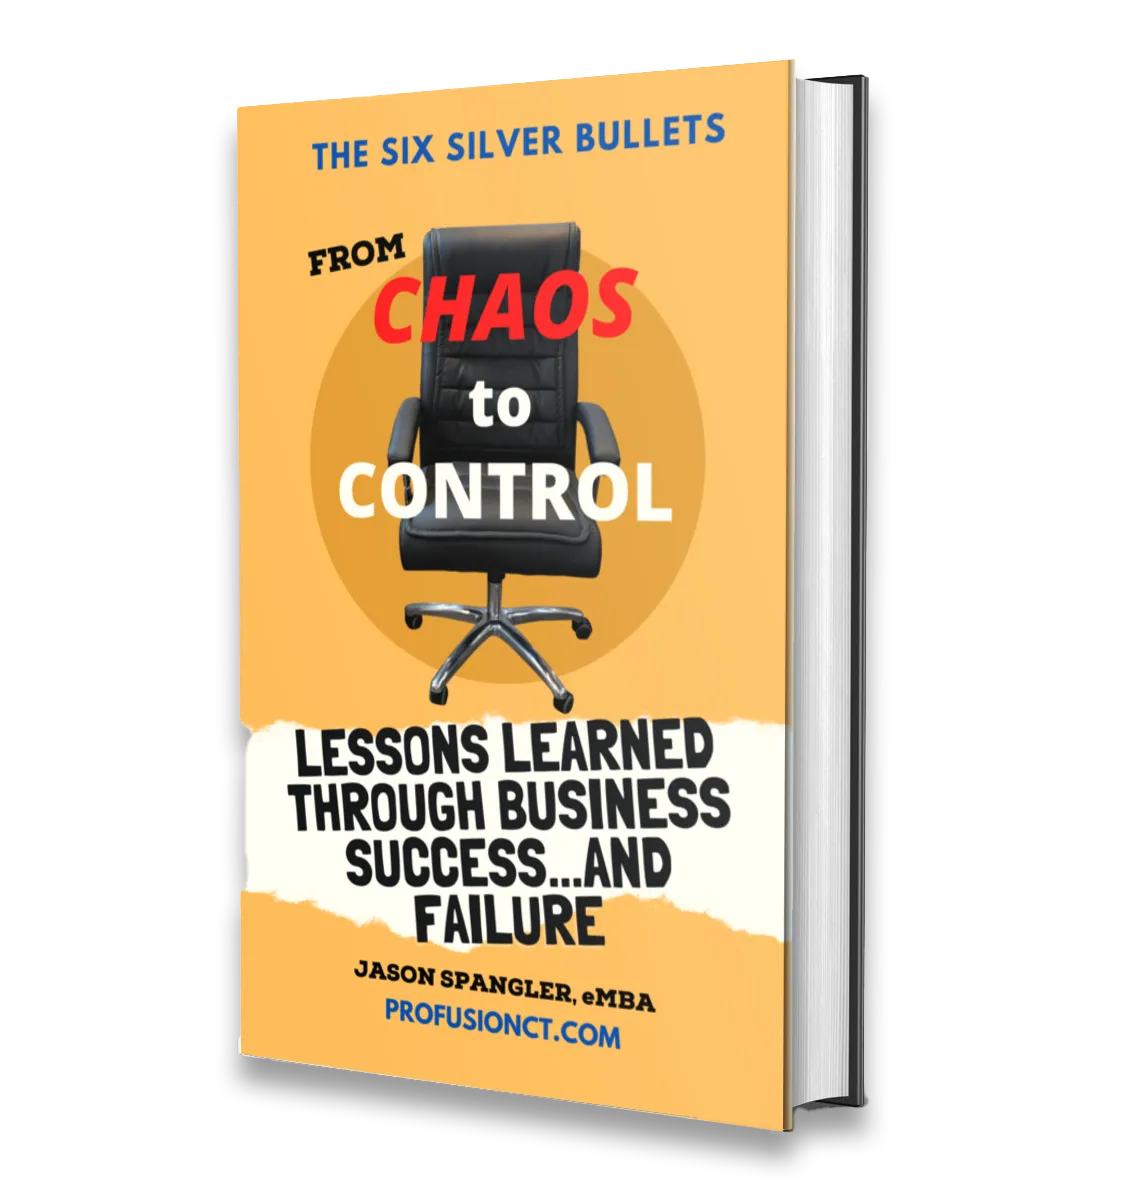 Business owners can read this E-book to help turn chaos into control